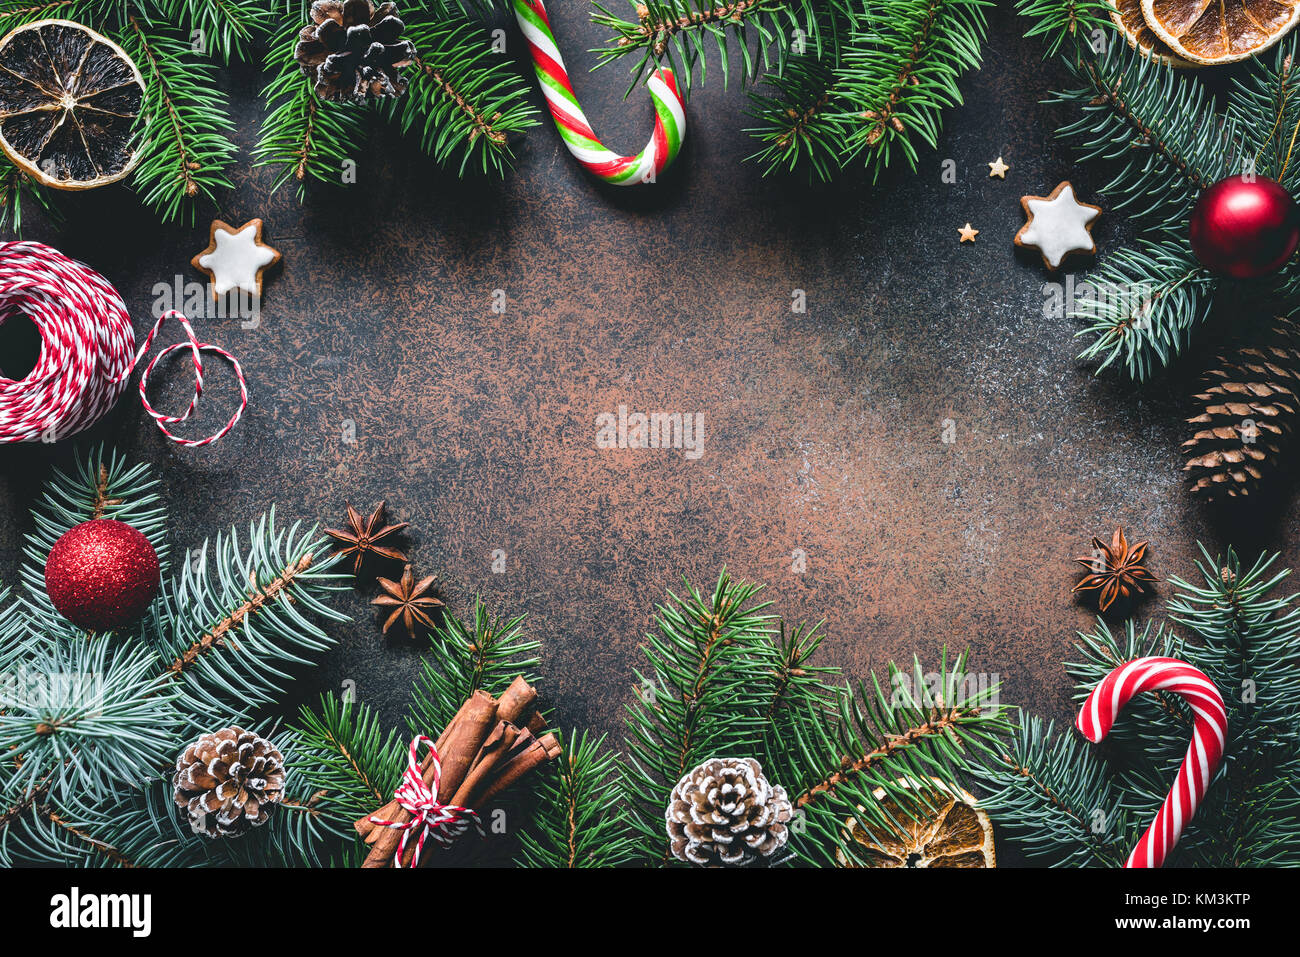 Christmas frame with fir tree branches, candy canes, gingerbread cookies, spices and dried oranges. Copy space for text Stock Photo